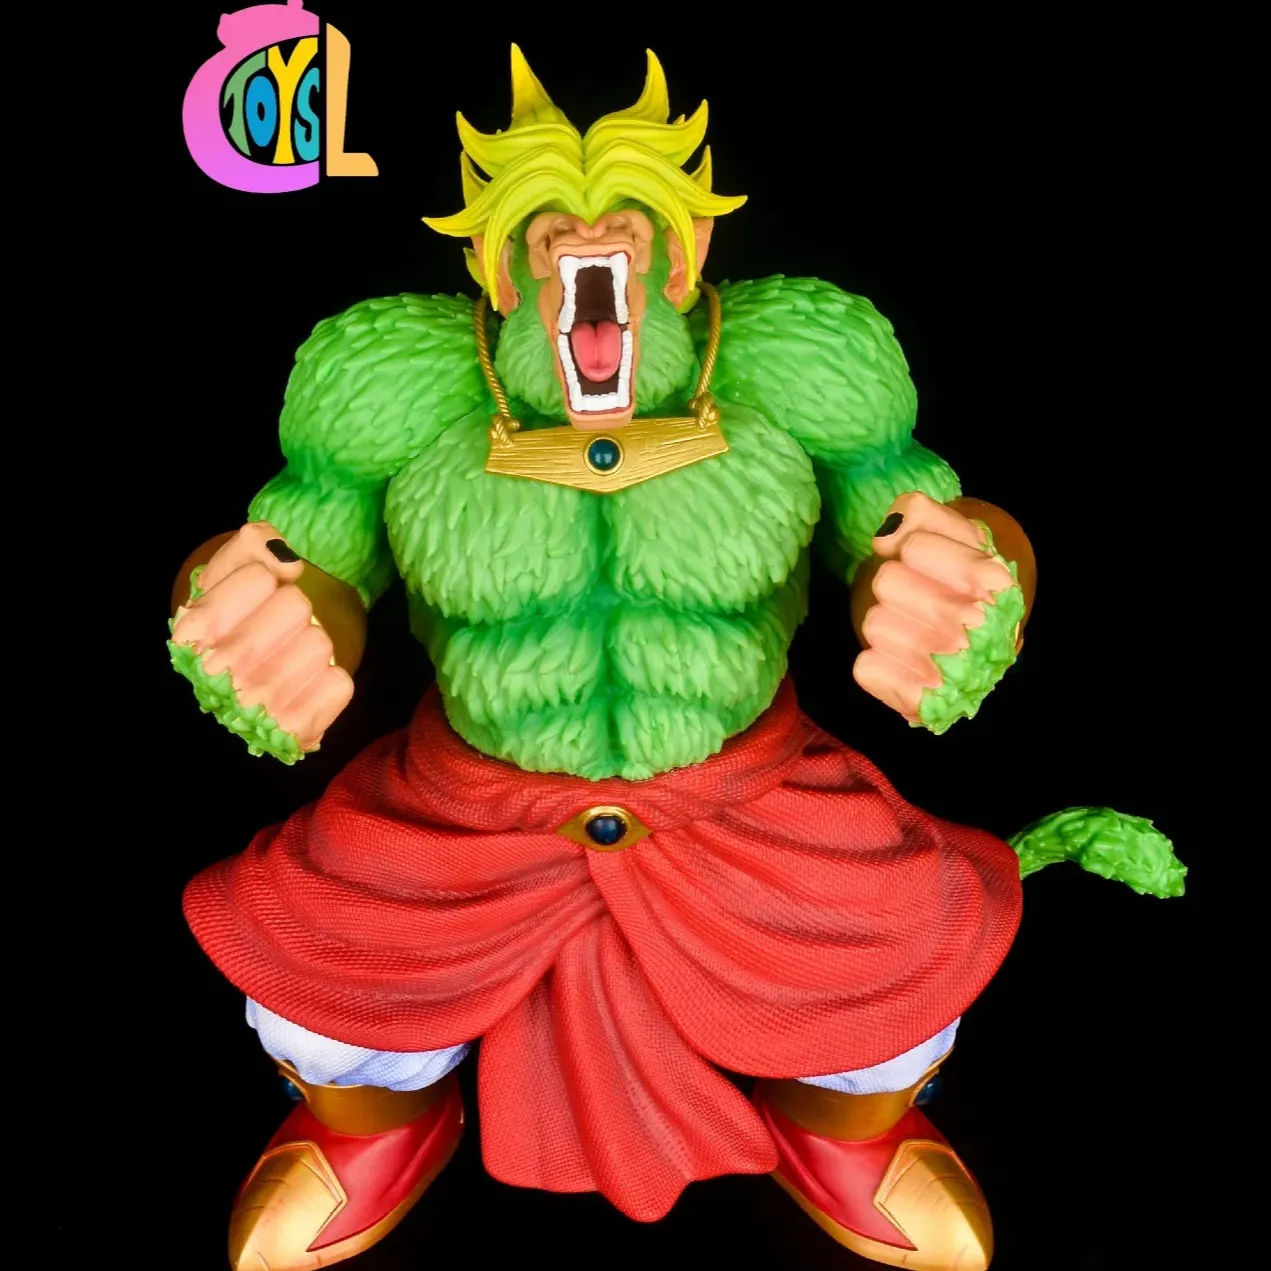 46cm Anime Gk Dbz Super Saiyan Broly Action Figure Pvc Collection Model Toy For Gifts